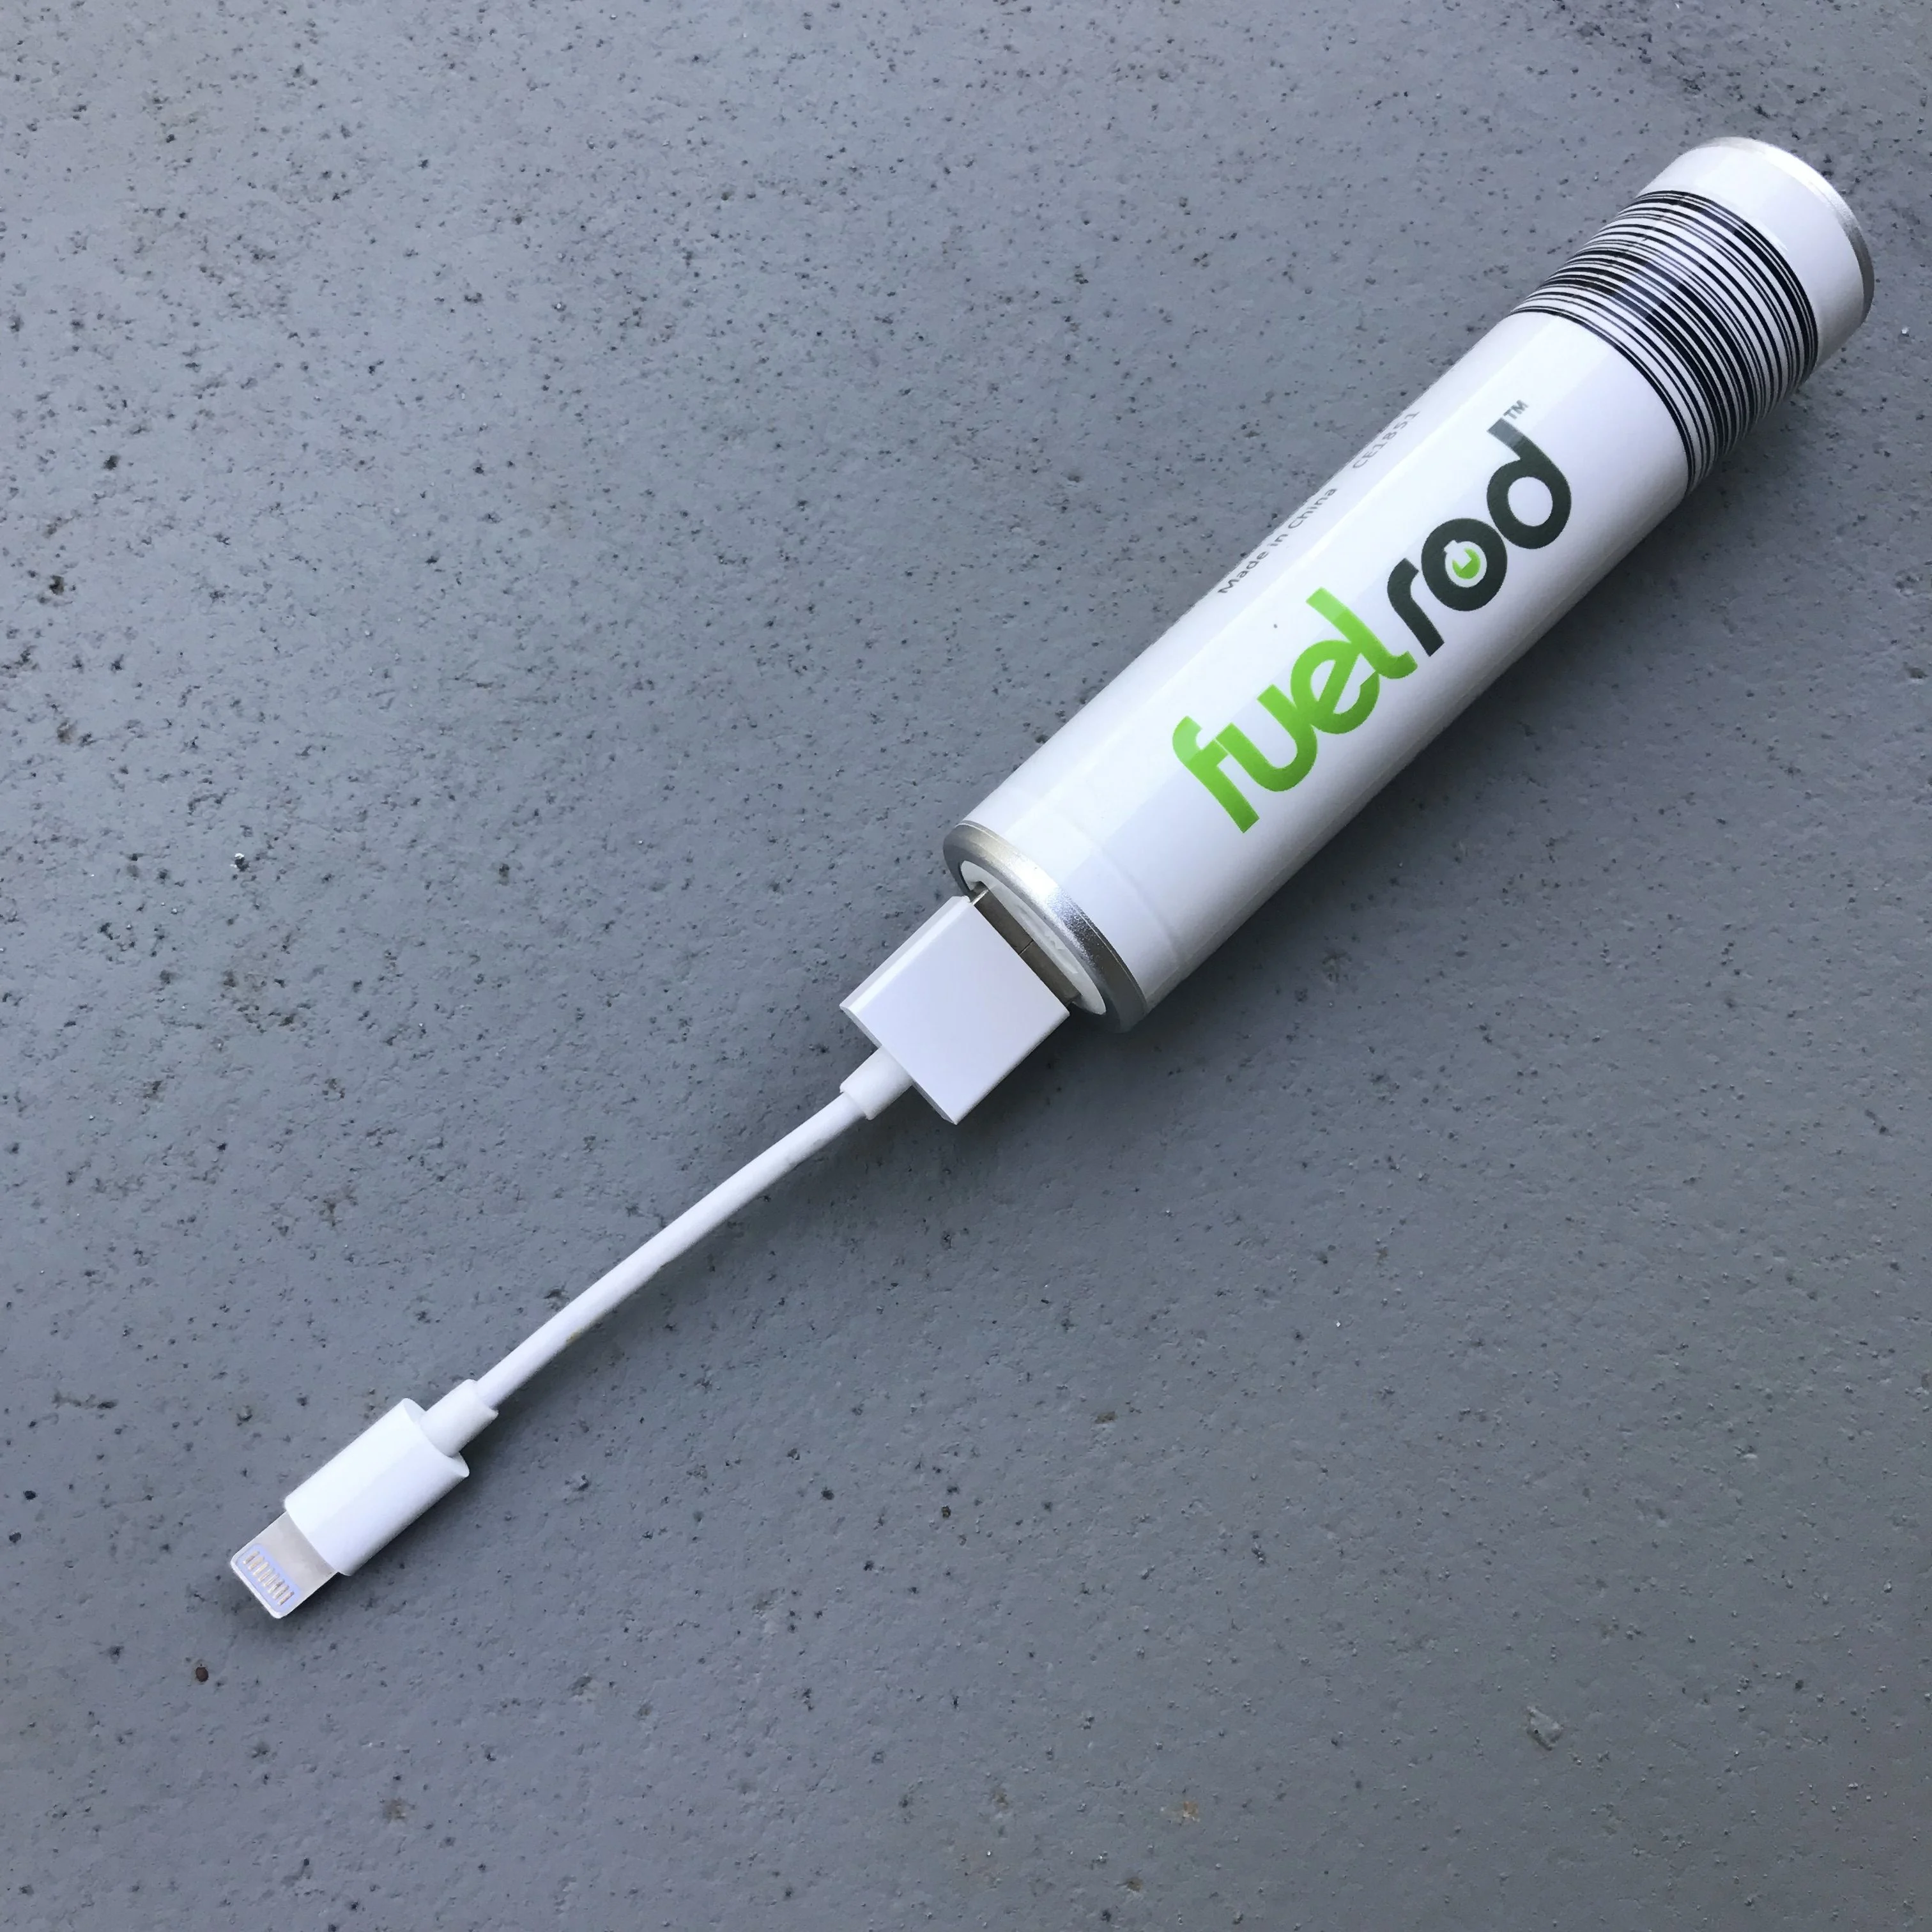 fuelrod with charging cable attached